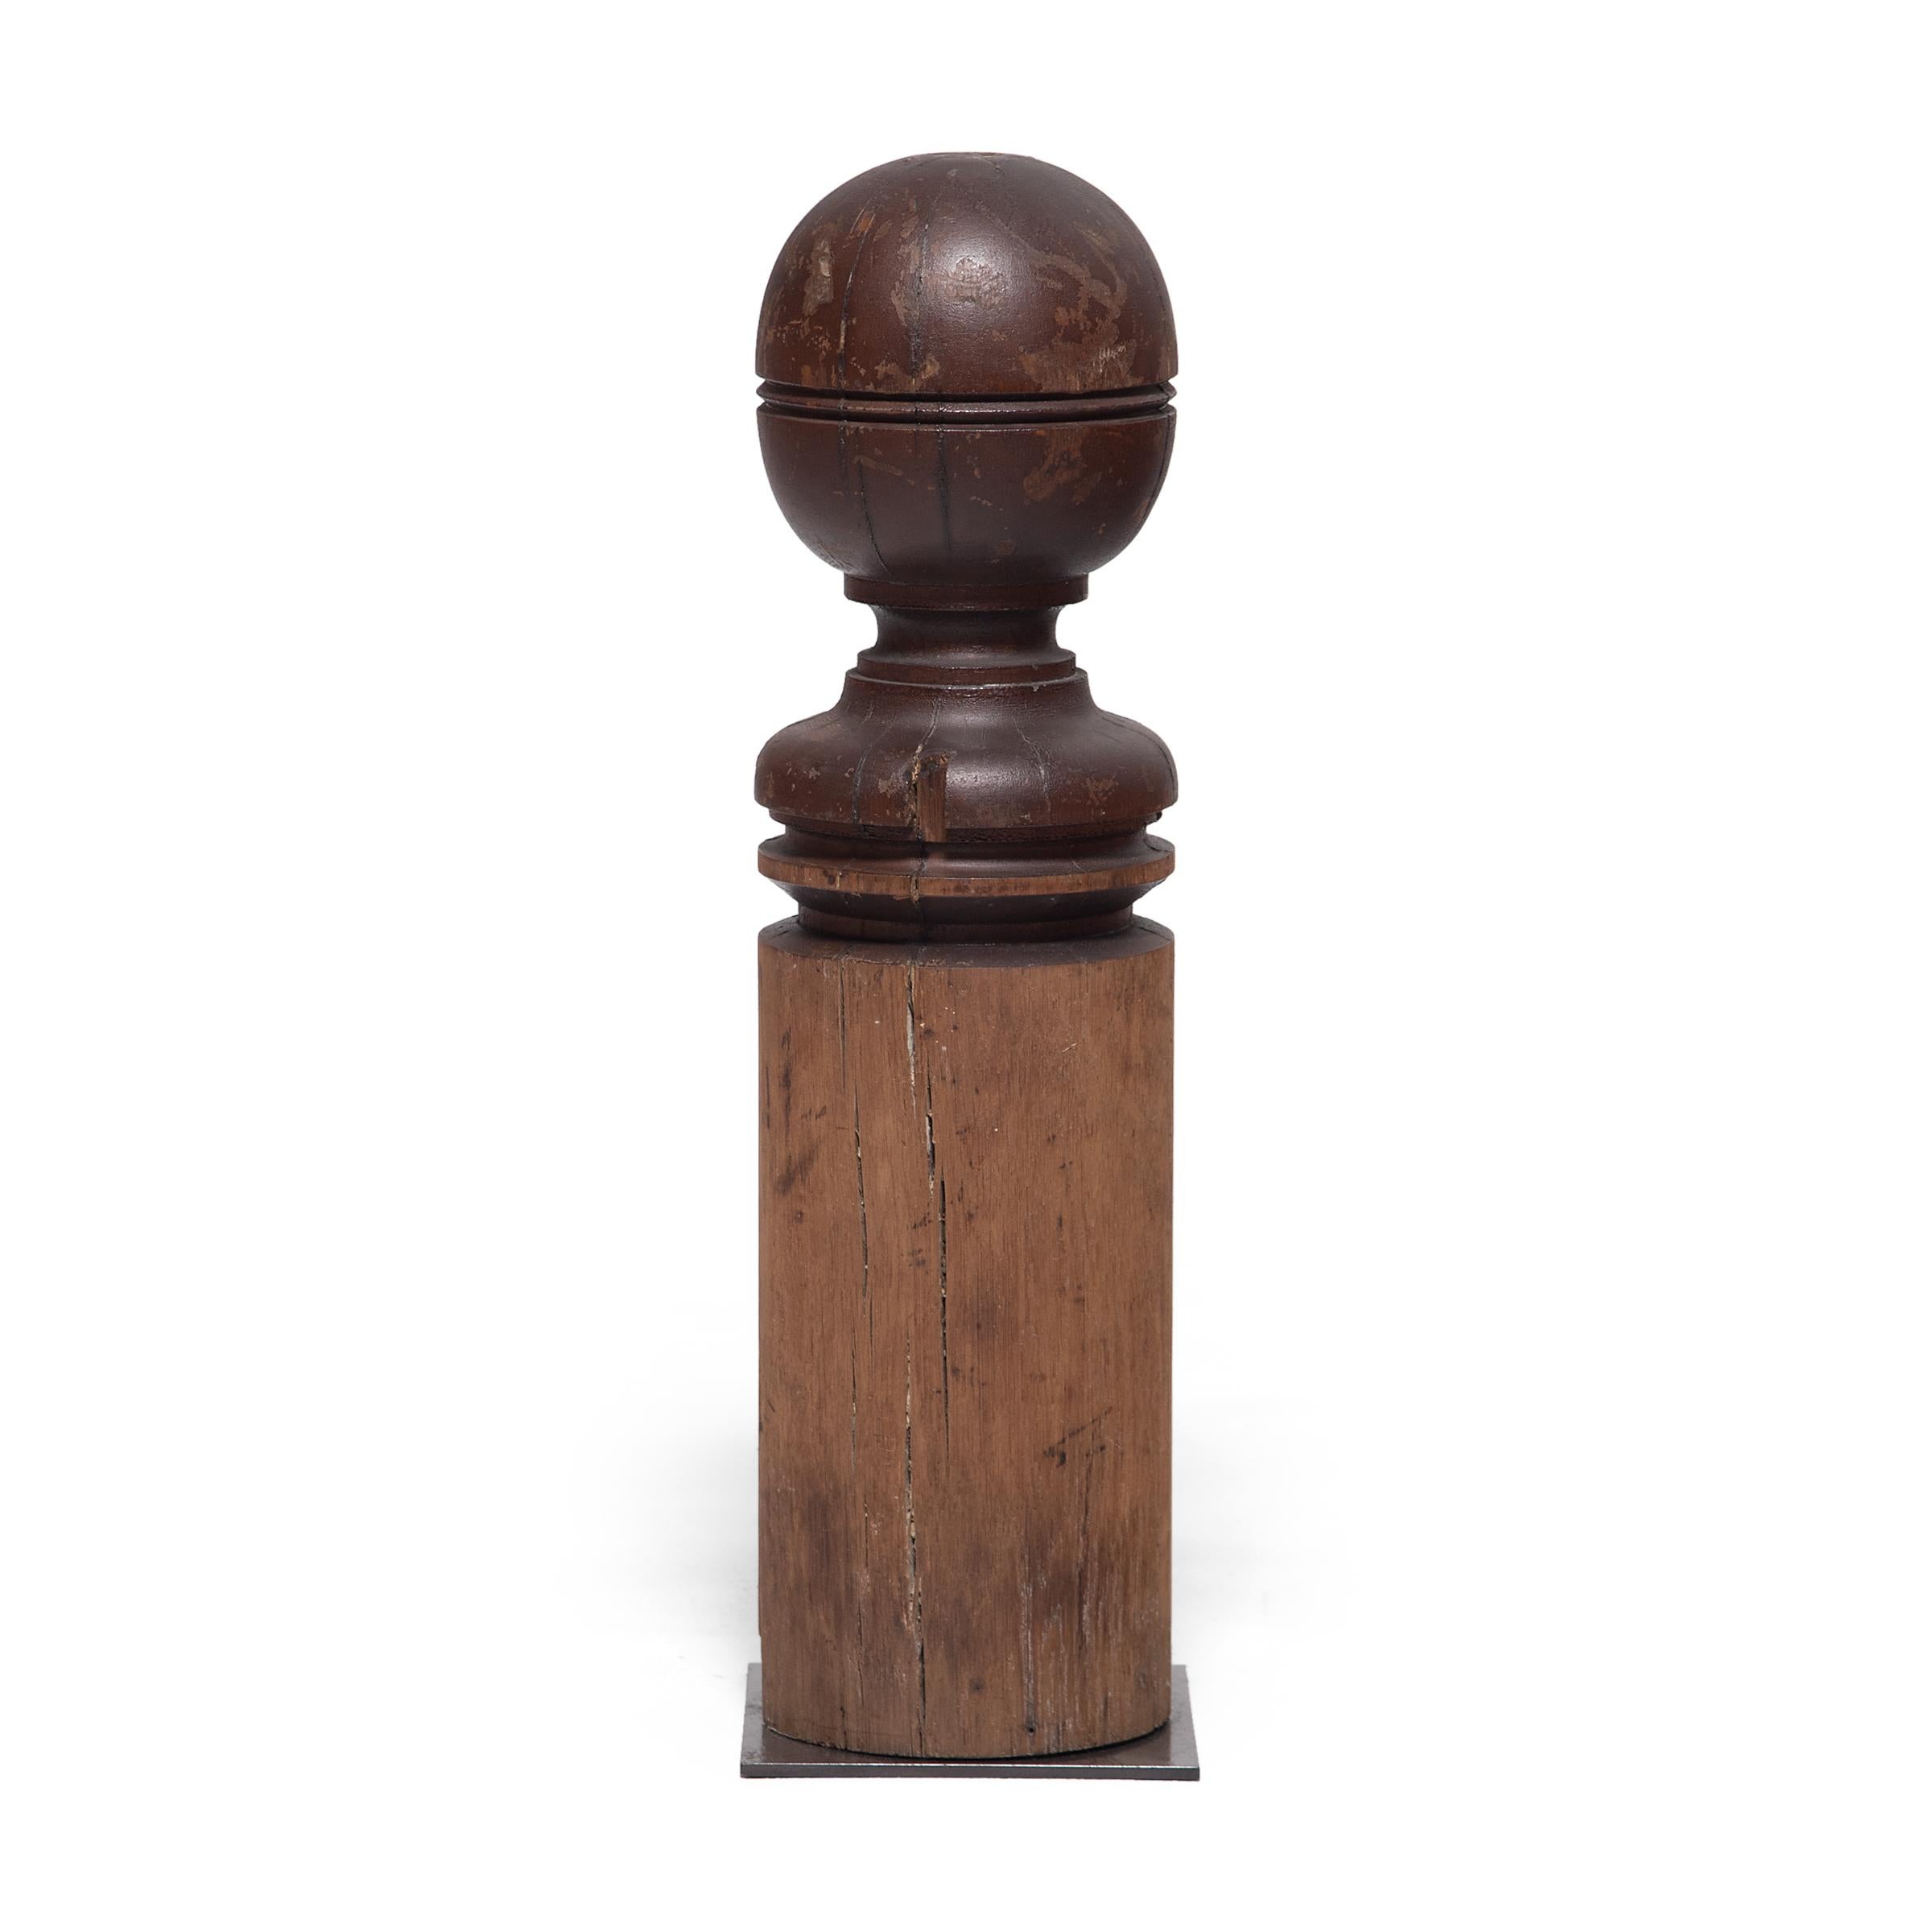 Dated to the early 20th century, this antique turned newel post was crafted from American oak with a simple ball finial top. The original dark finish has faded along the round post to reveal the natural texture of the oak with a subtle gradient. Set